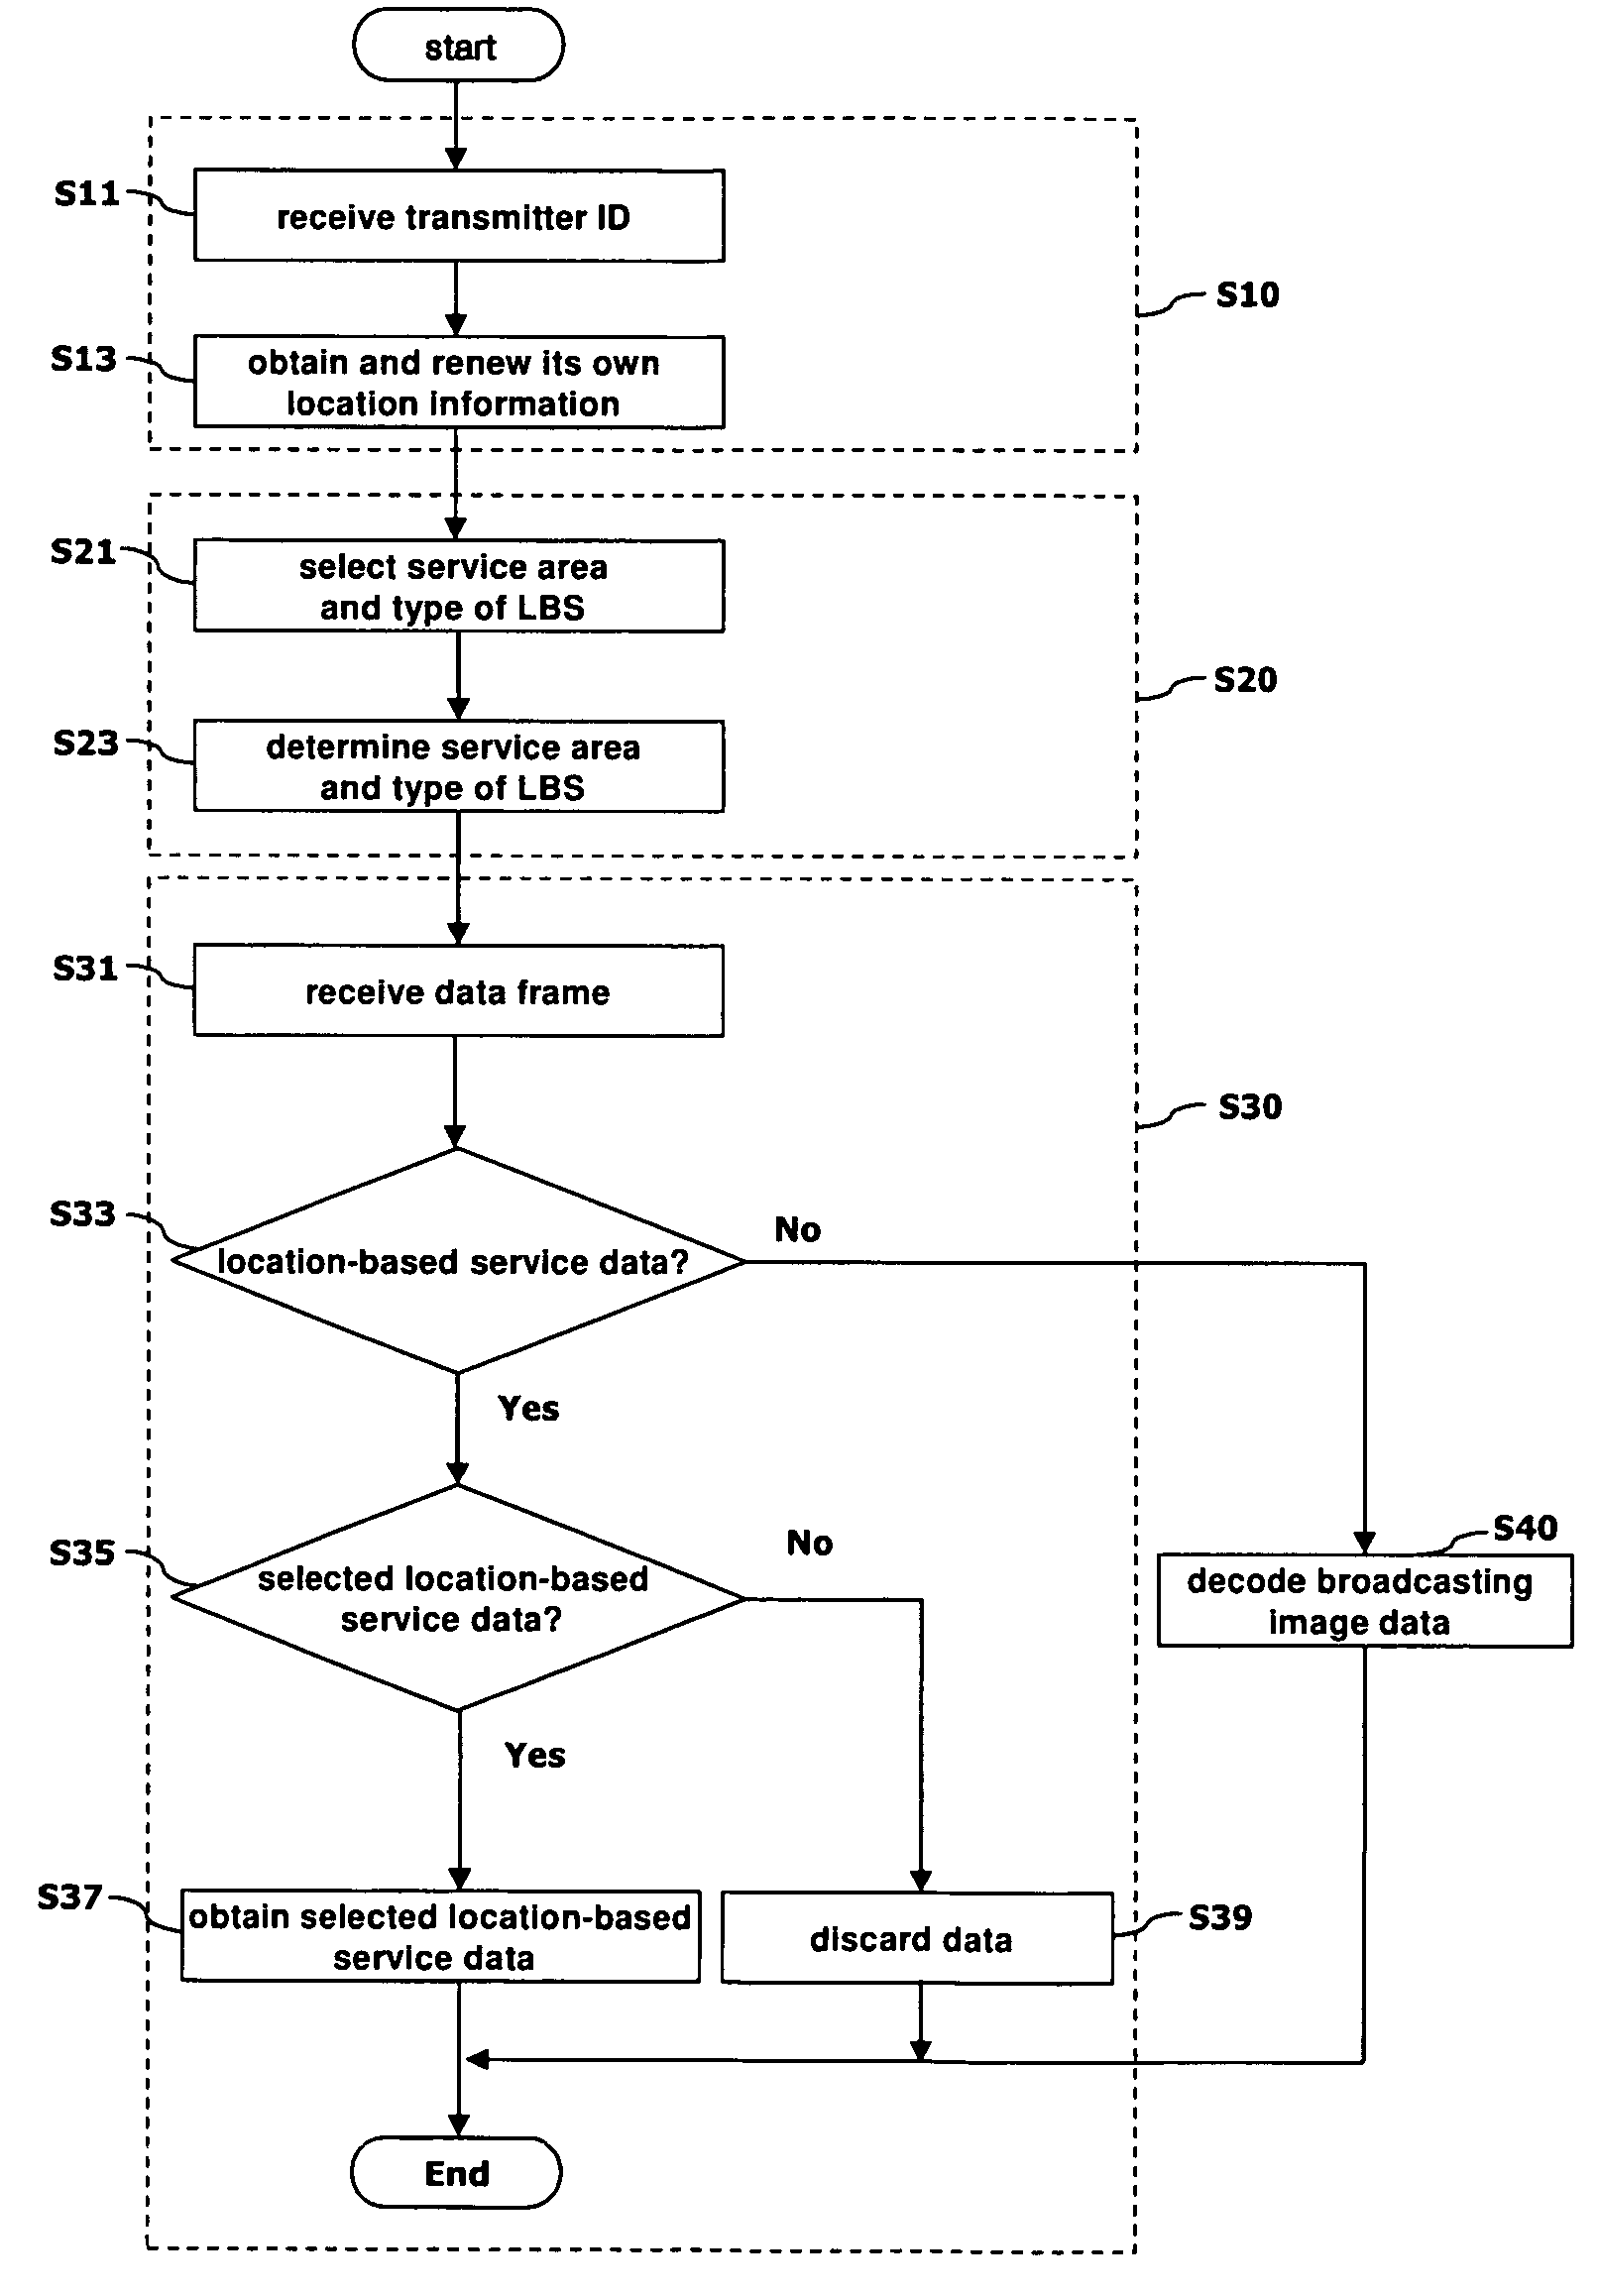 Location based service for point-to-multipoint broadcasting